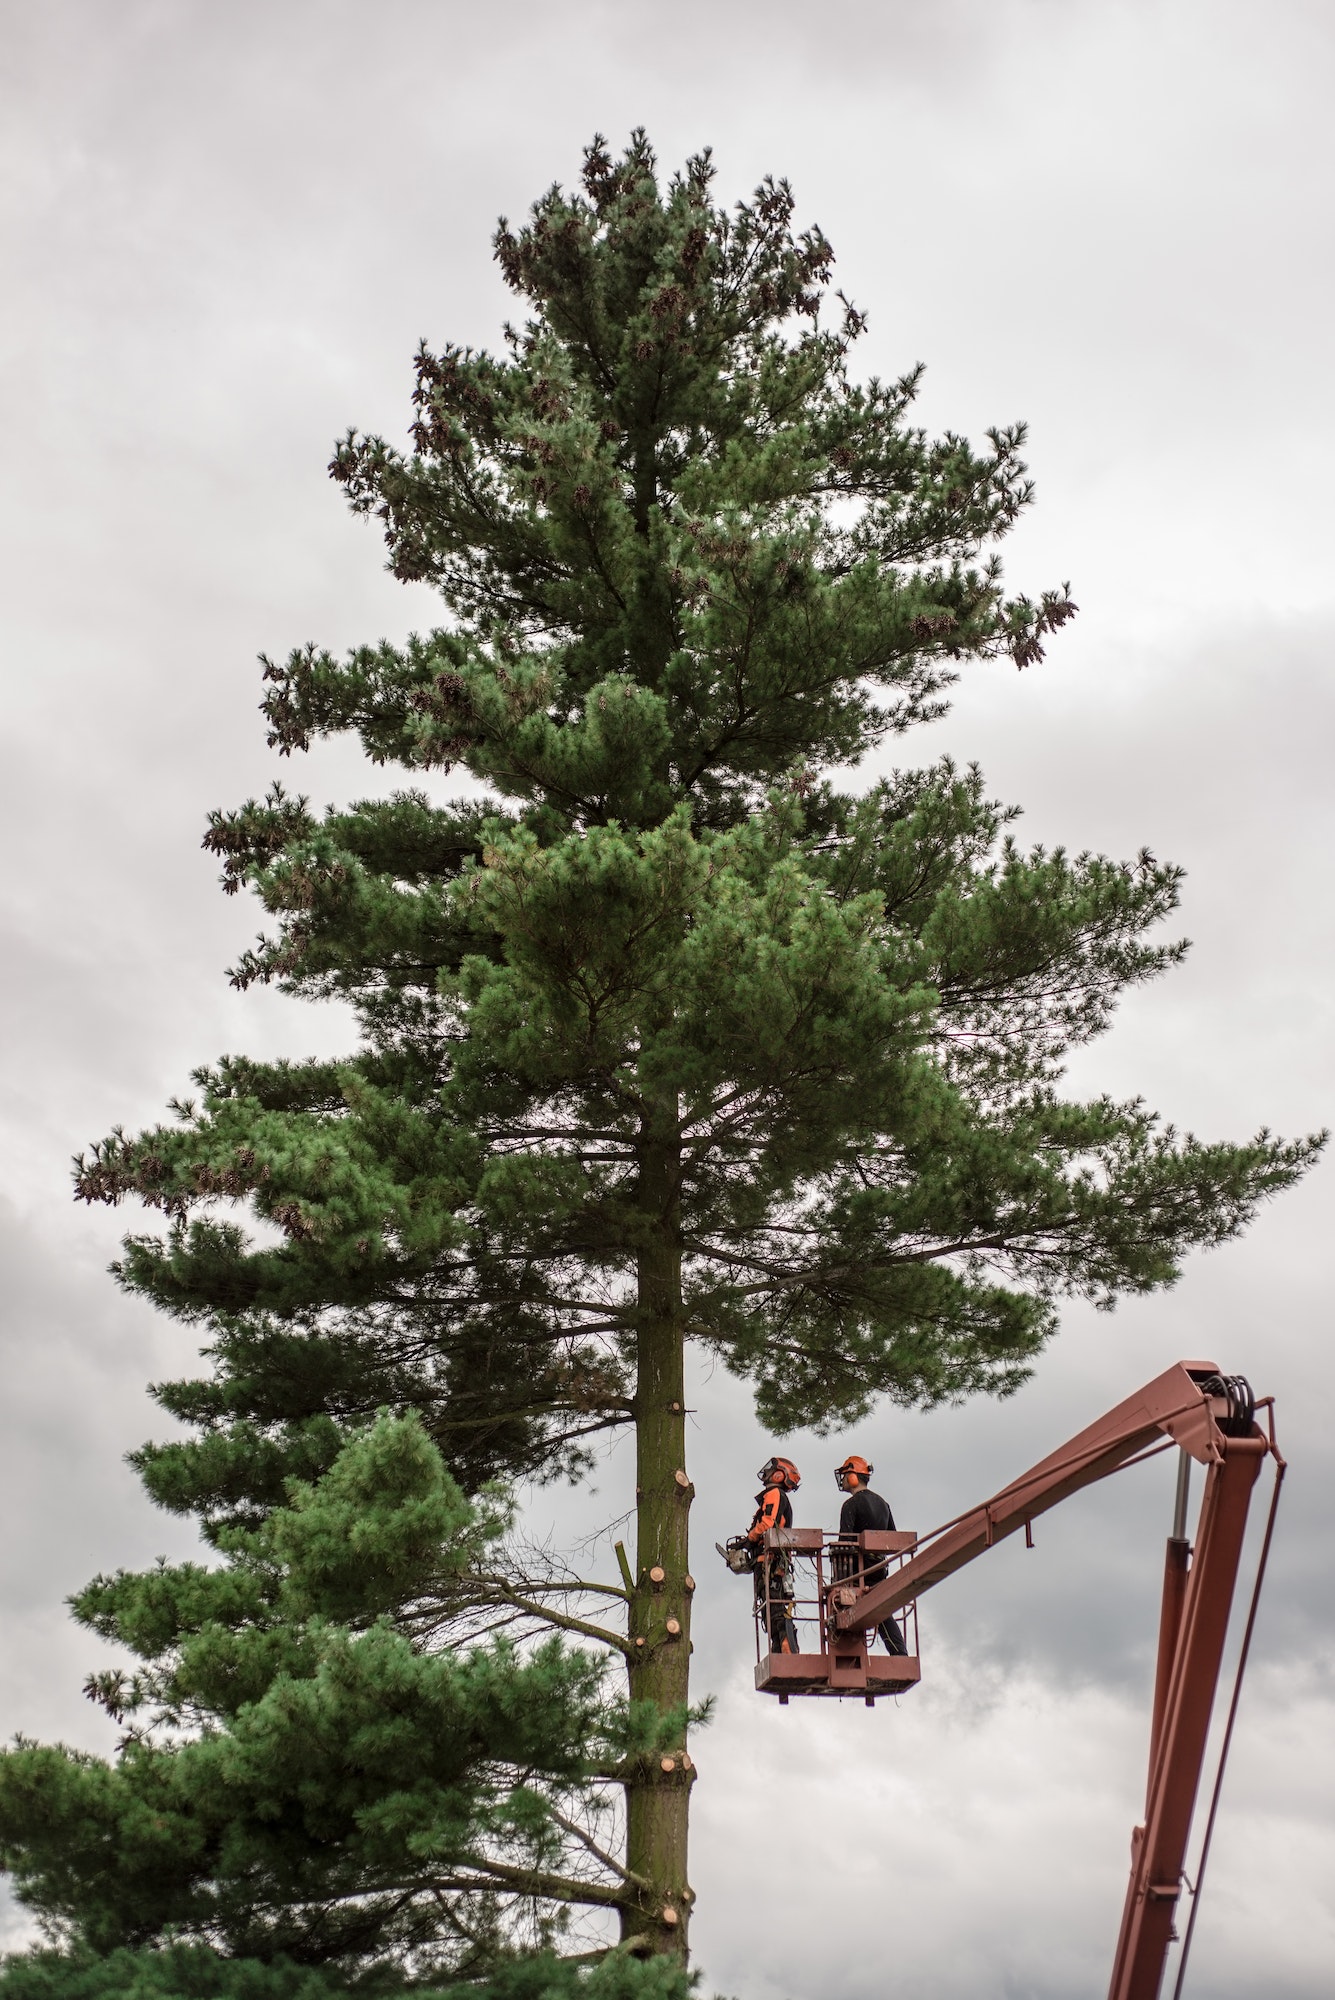 Arborist men with chainsaw and lifting platform cutting a tree